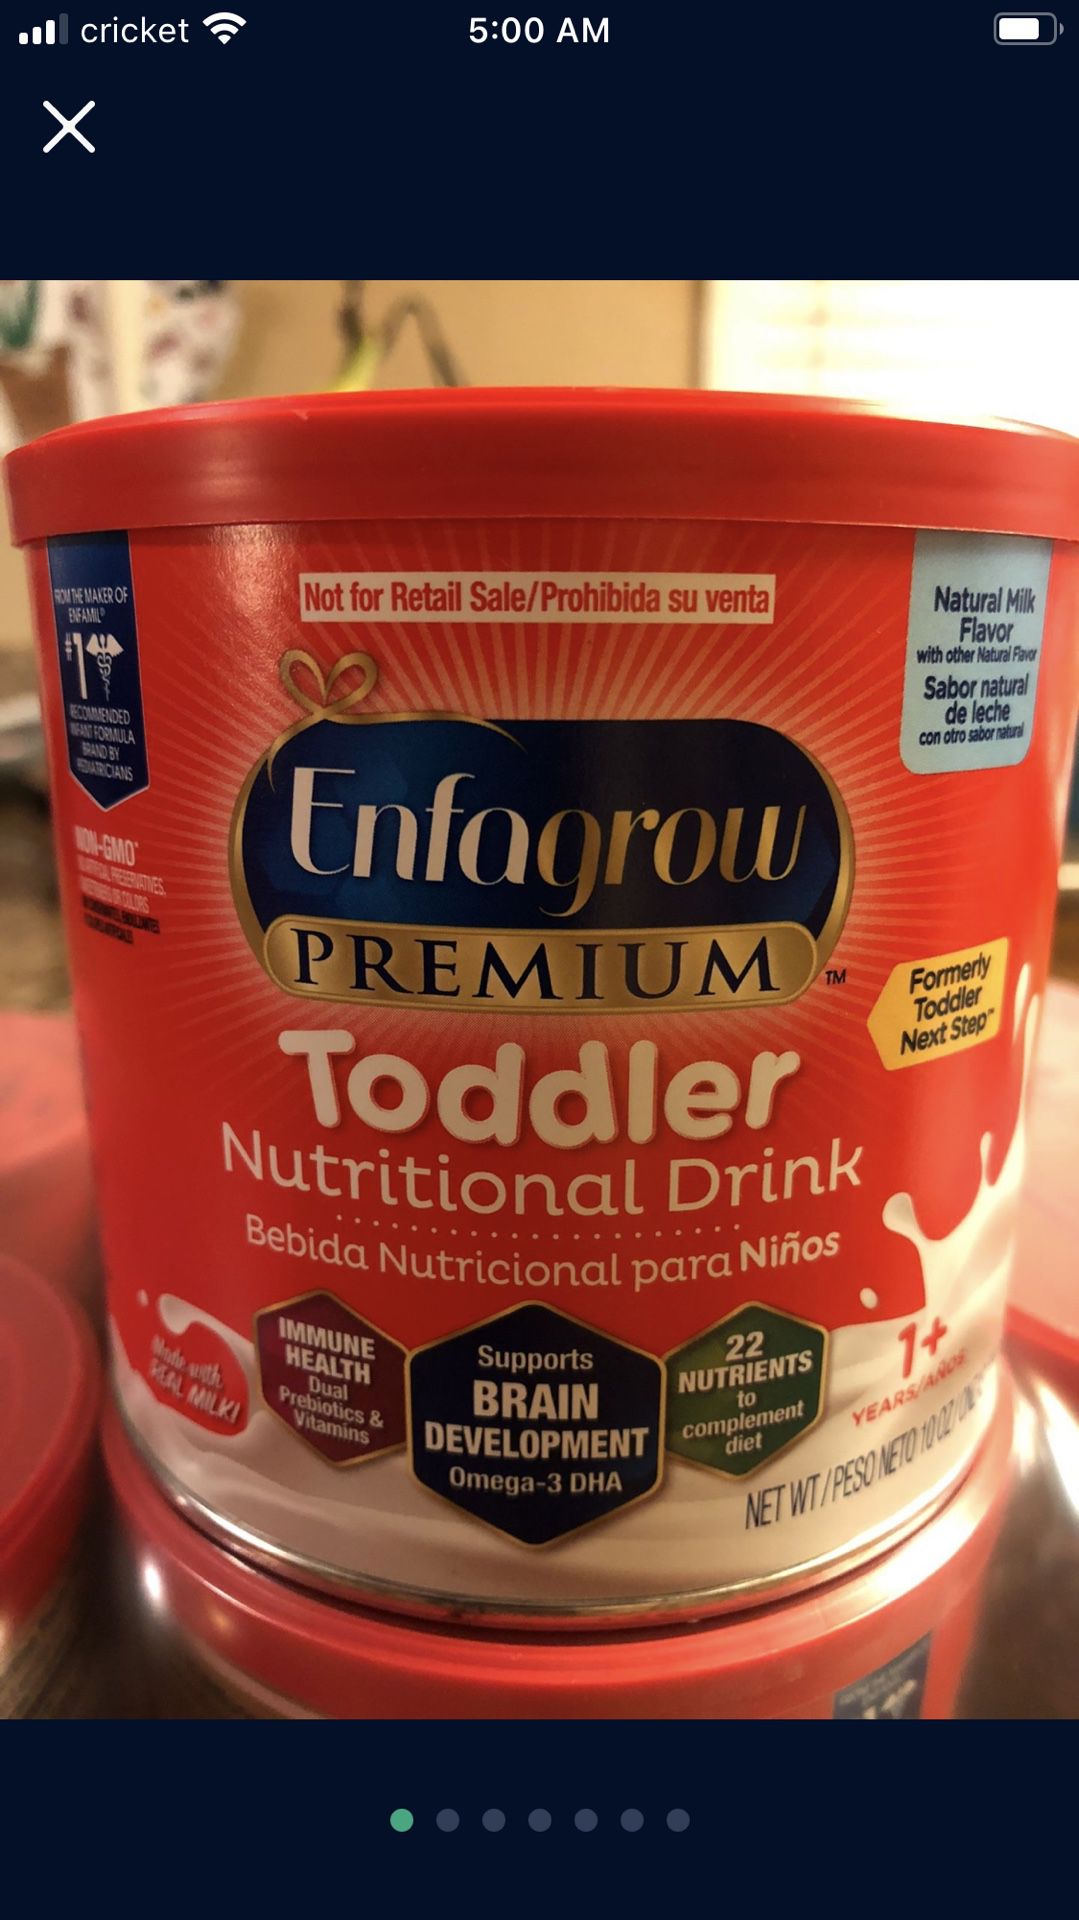 New 10 Oz Powdered Mil For Growing Toddlers $5 Each Can. 